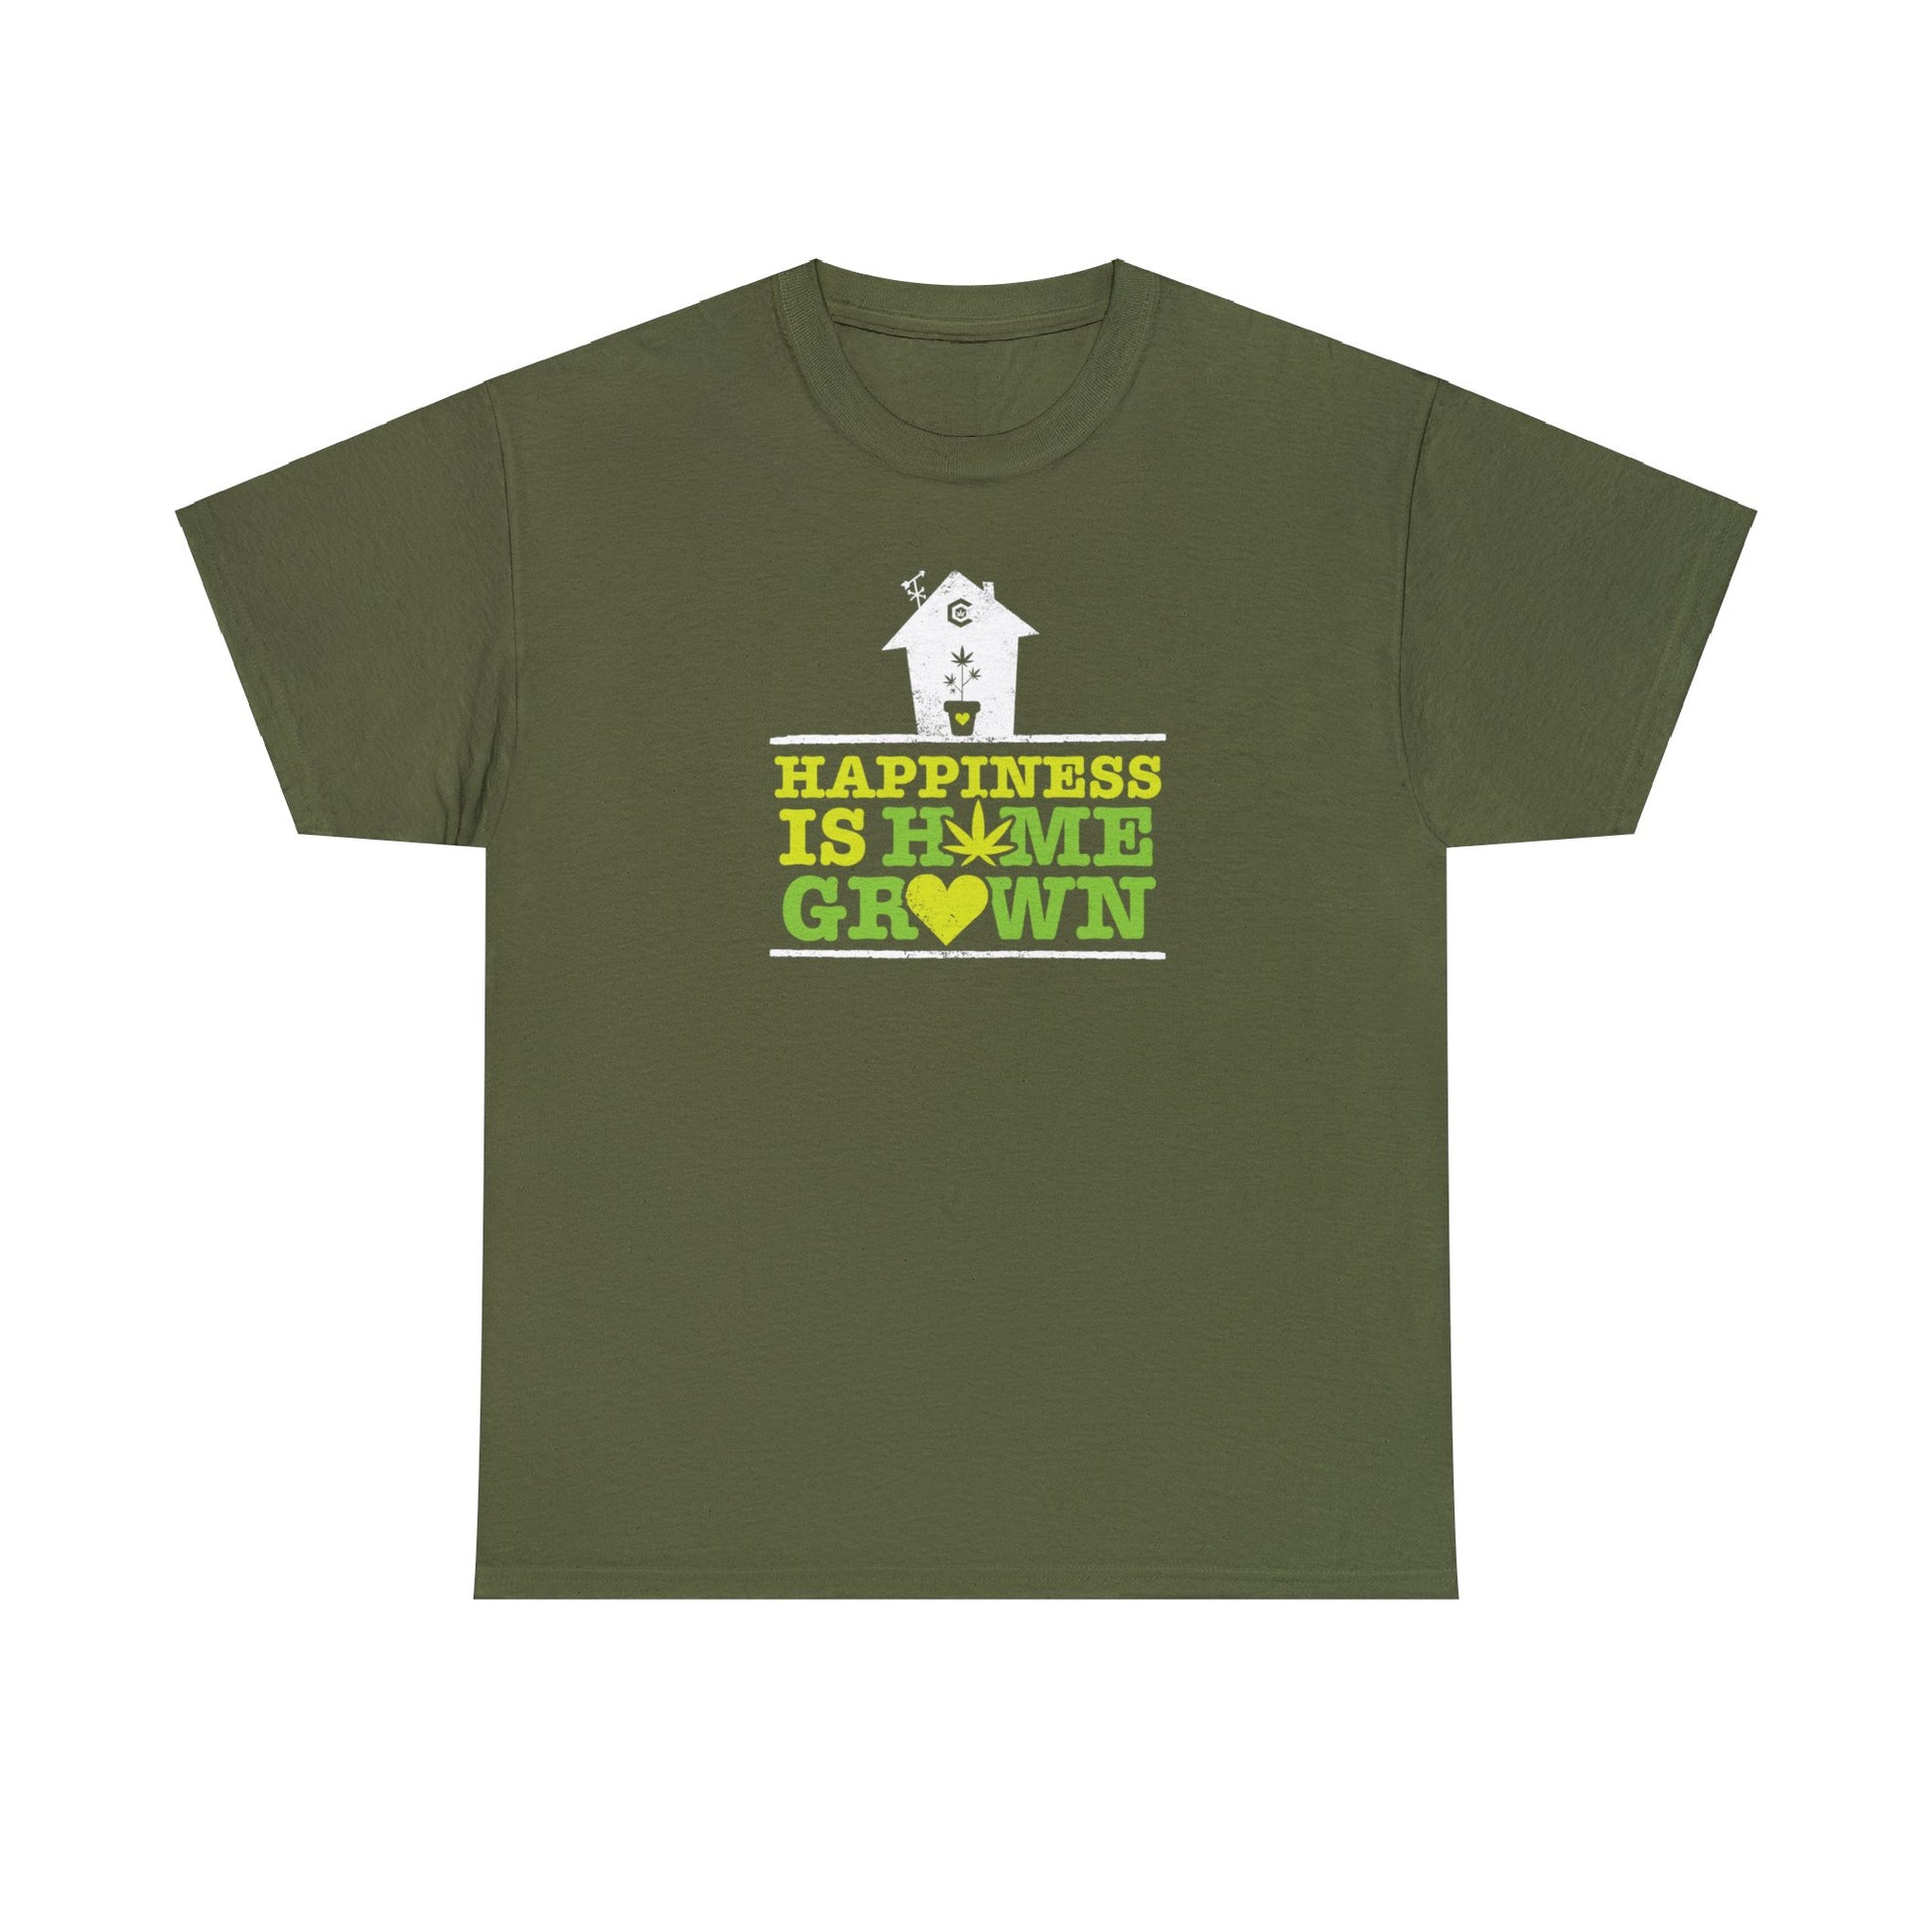 A green Happiness Is Homegrown Pot shirt with a house design.